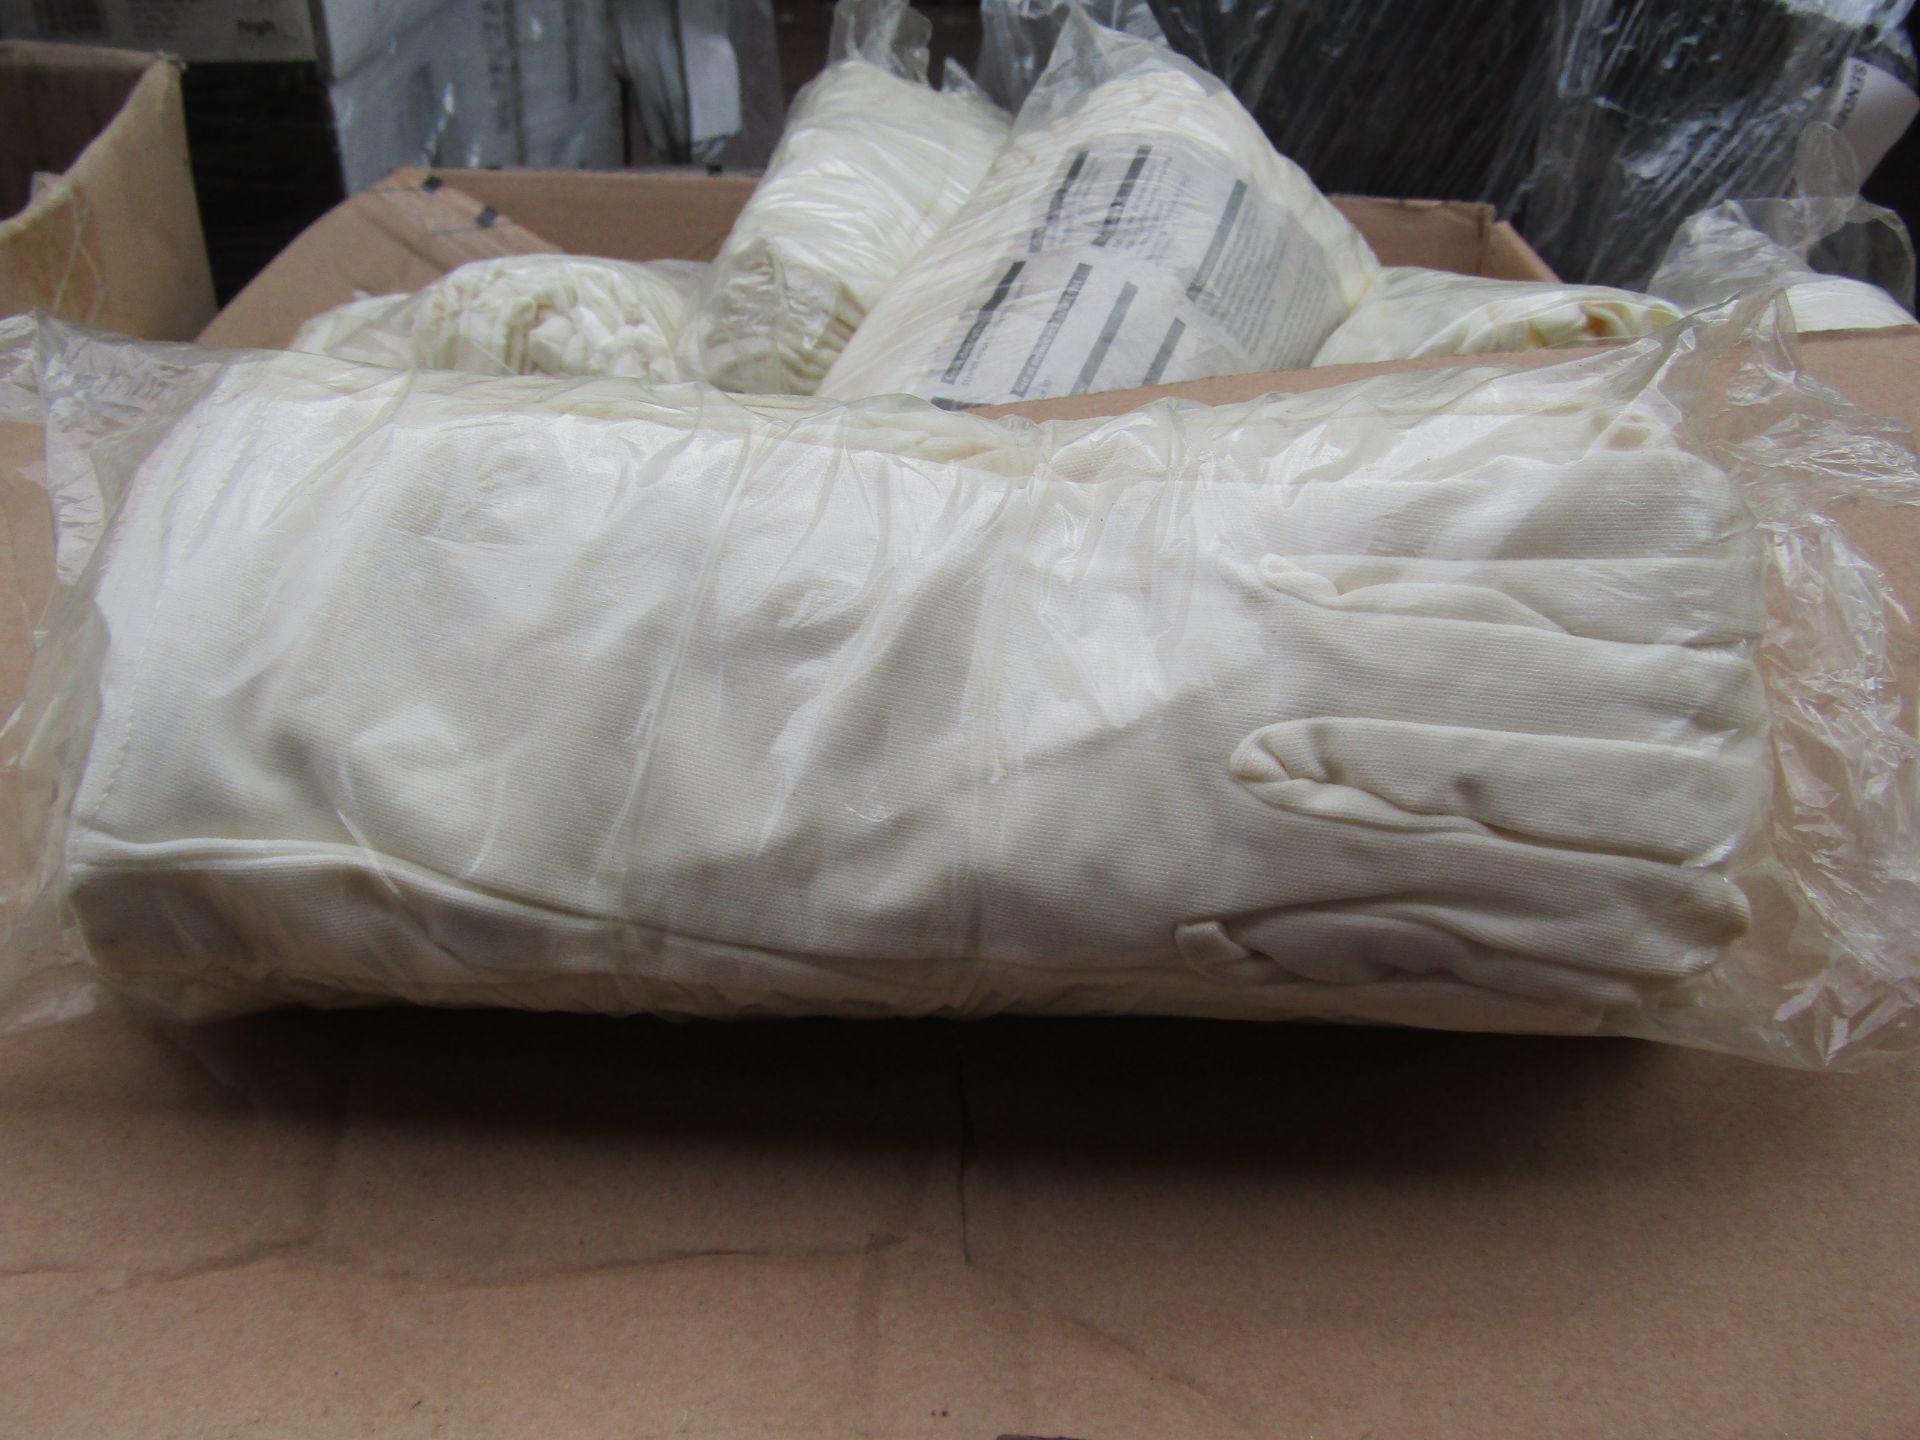 12x Stretch nylon gloves, size 10, new and packaged.